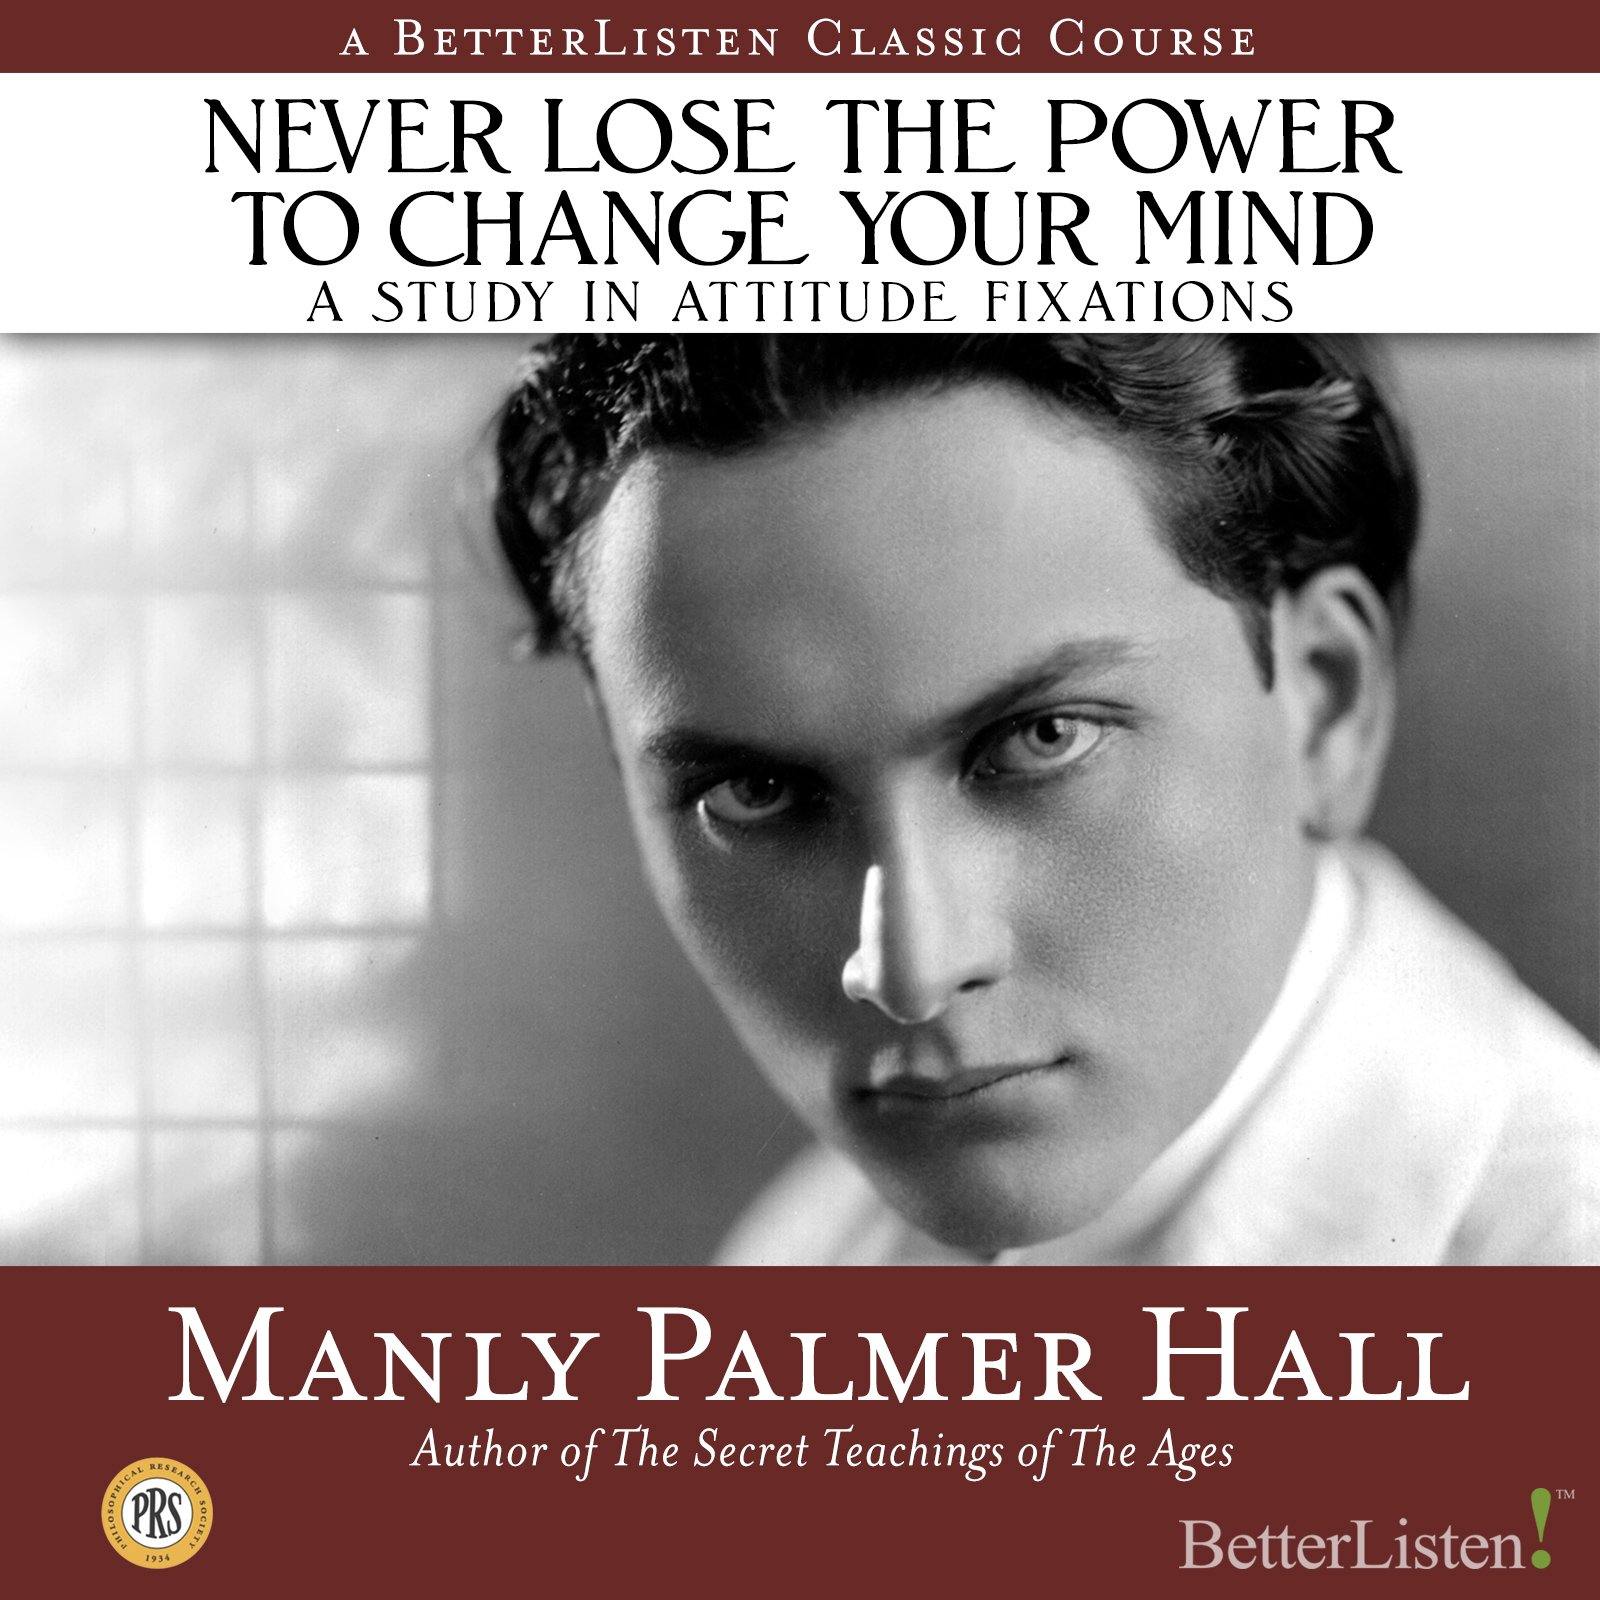 Never Lose the Power to Change Your Mind: A Study In Attitude Fixations with Manly P. Hall Audio Program Philosophical Research Society - BetterListen!